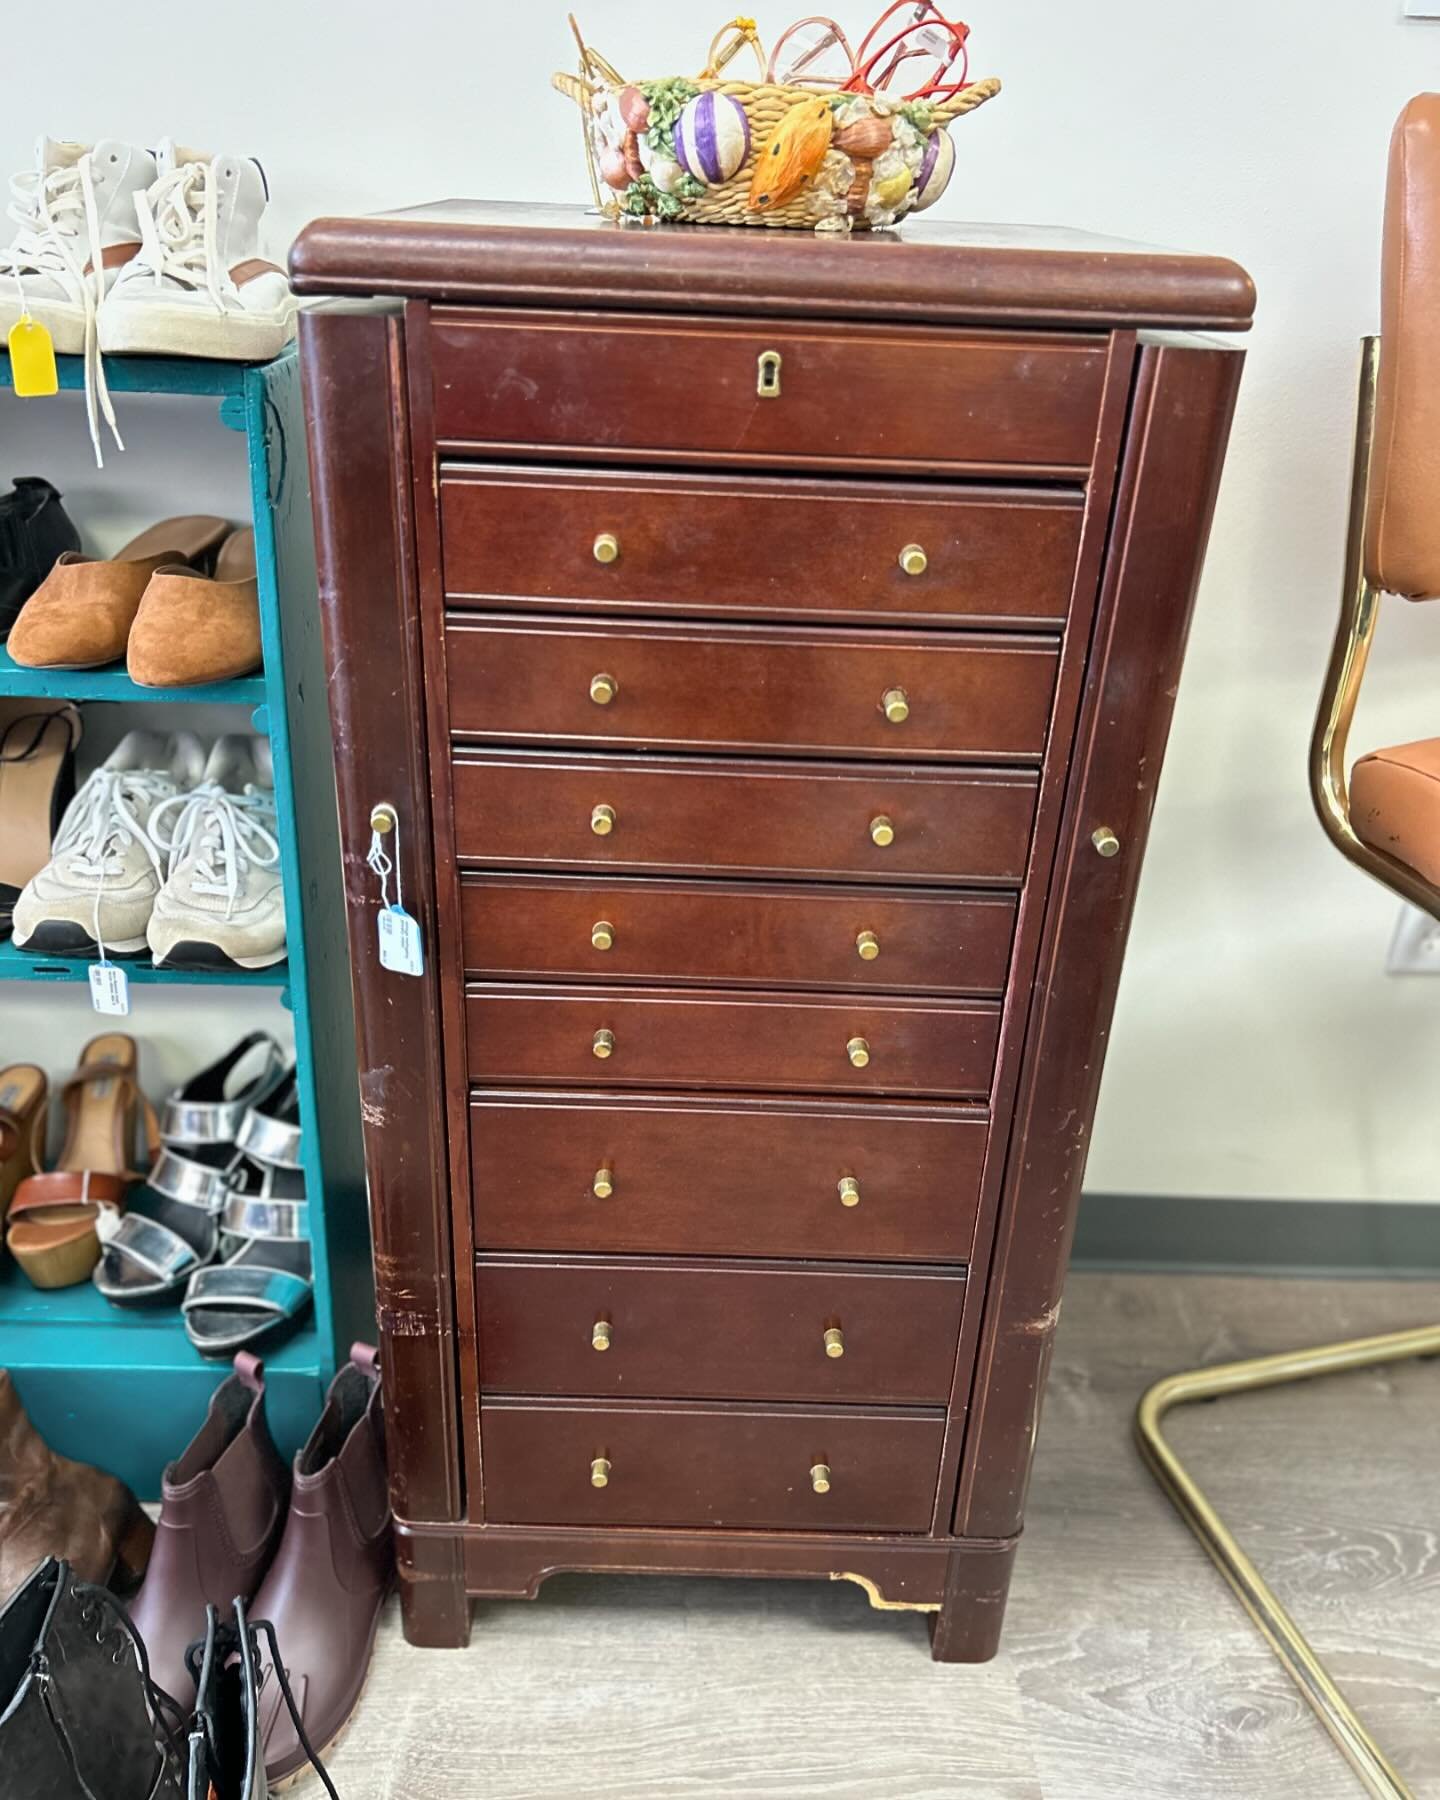 Furniture &amp; home goods you can currently find in our consignment shop! 👀😍

🤎 Vintage mahogany jewelry chest - $85

🤎 Vintage mid-century metal wood-style small 3-tier shelf - $45

🤎 Howard Kron mid-century modern ceramic table - $55 ($195 va